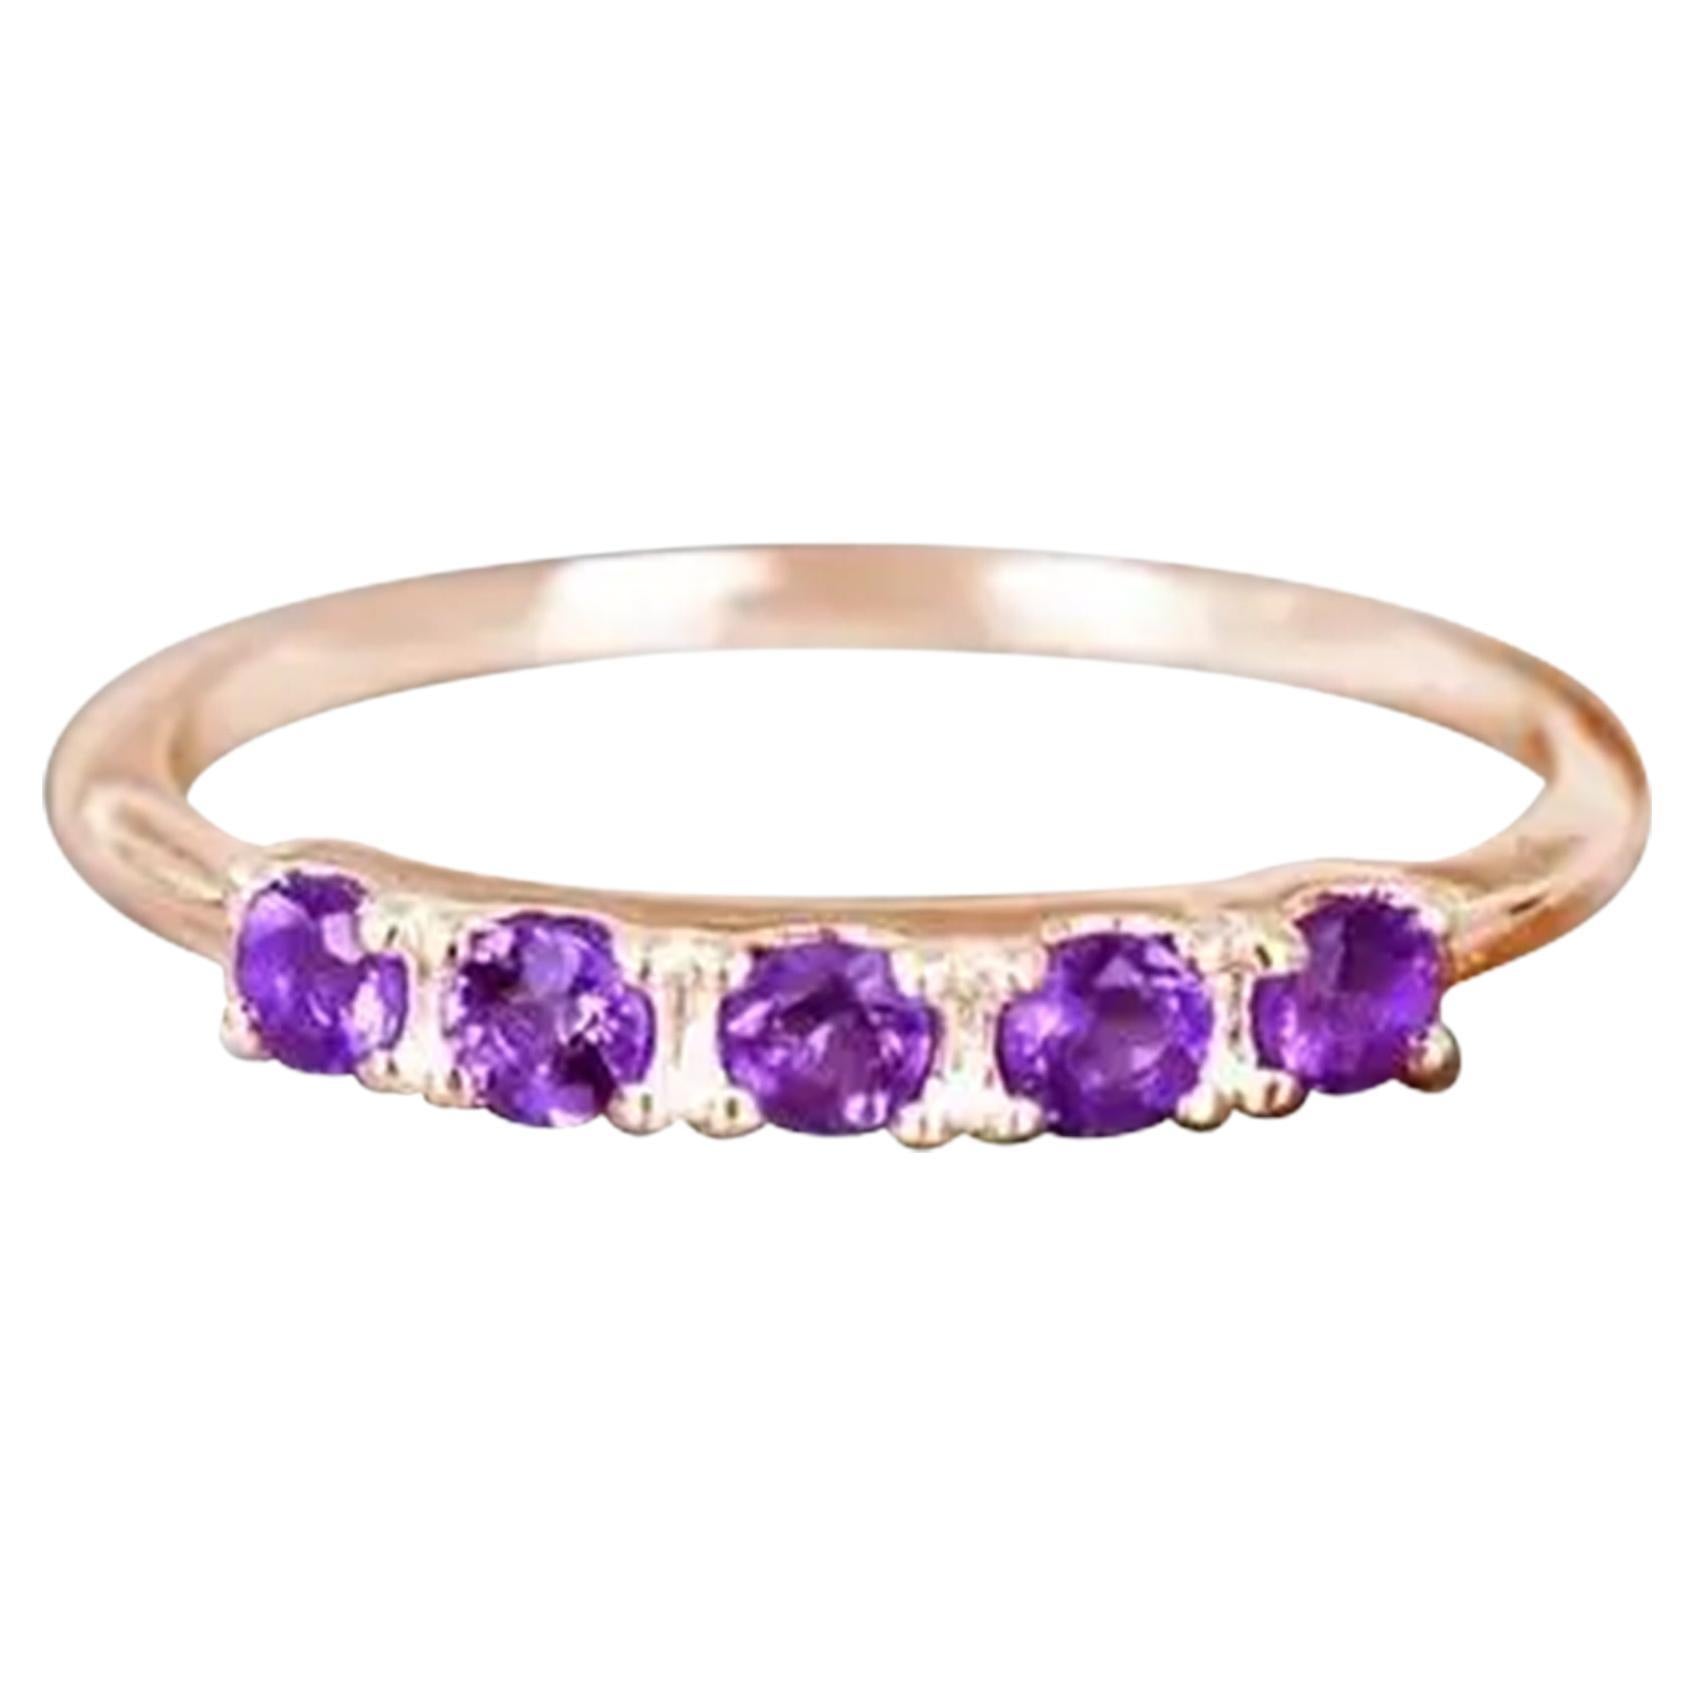 For Sale:  14k Gold Multiple Gemstone Ring Birthstone Ring Stackable Ring